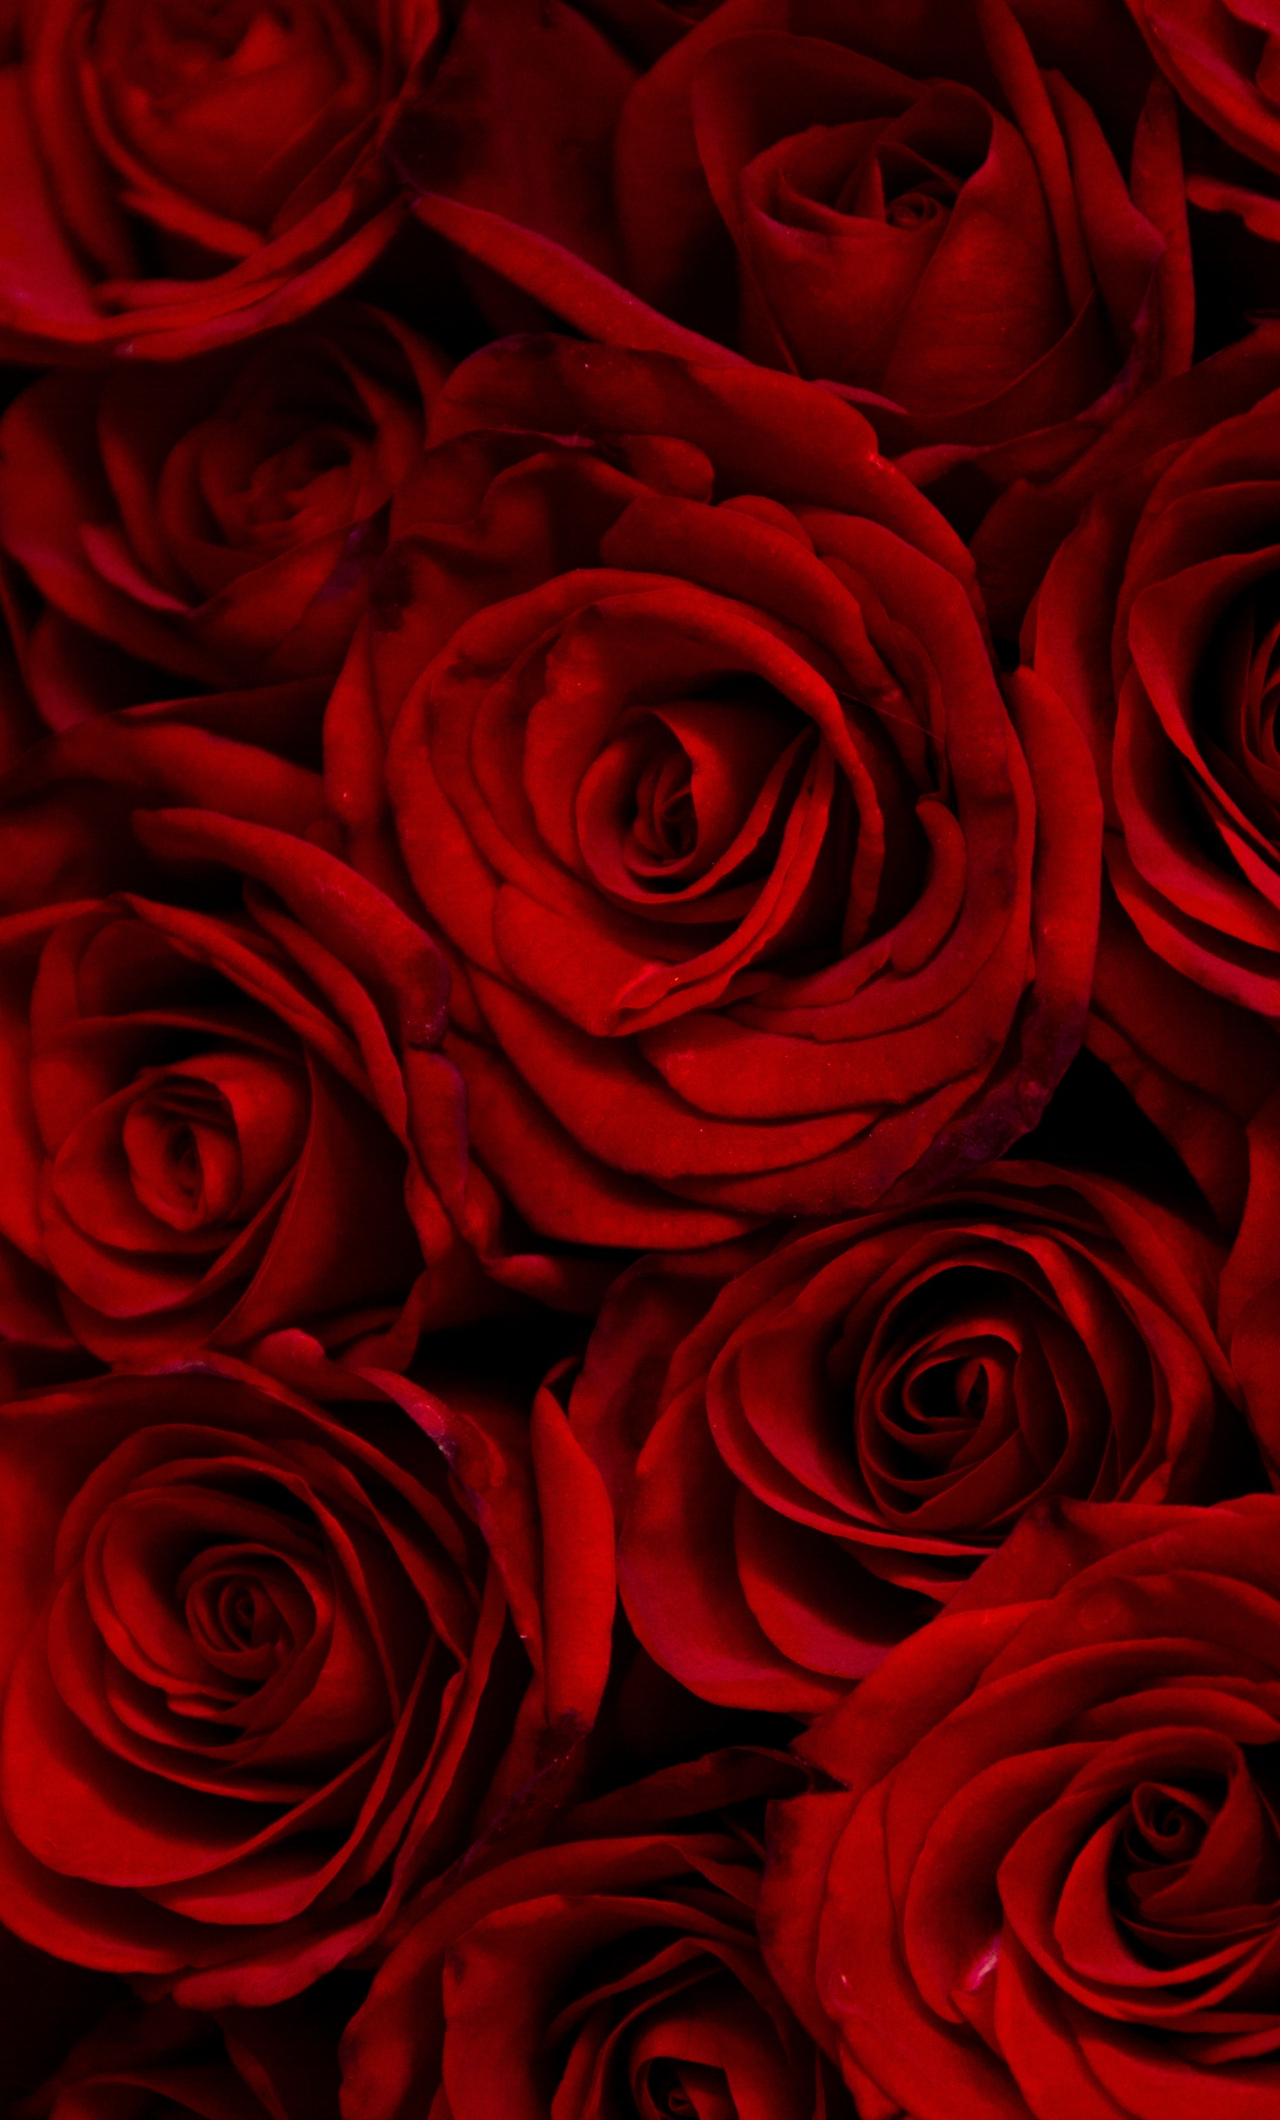 Download wallpaper 1280x2120 dark red roses decorative iphone 6 plus  1280x2120 hd background 9700